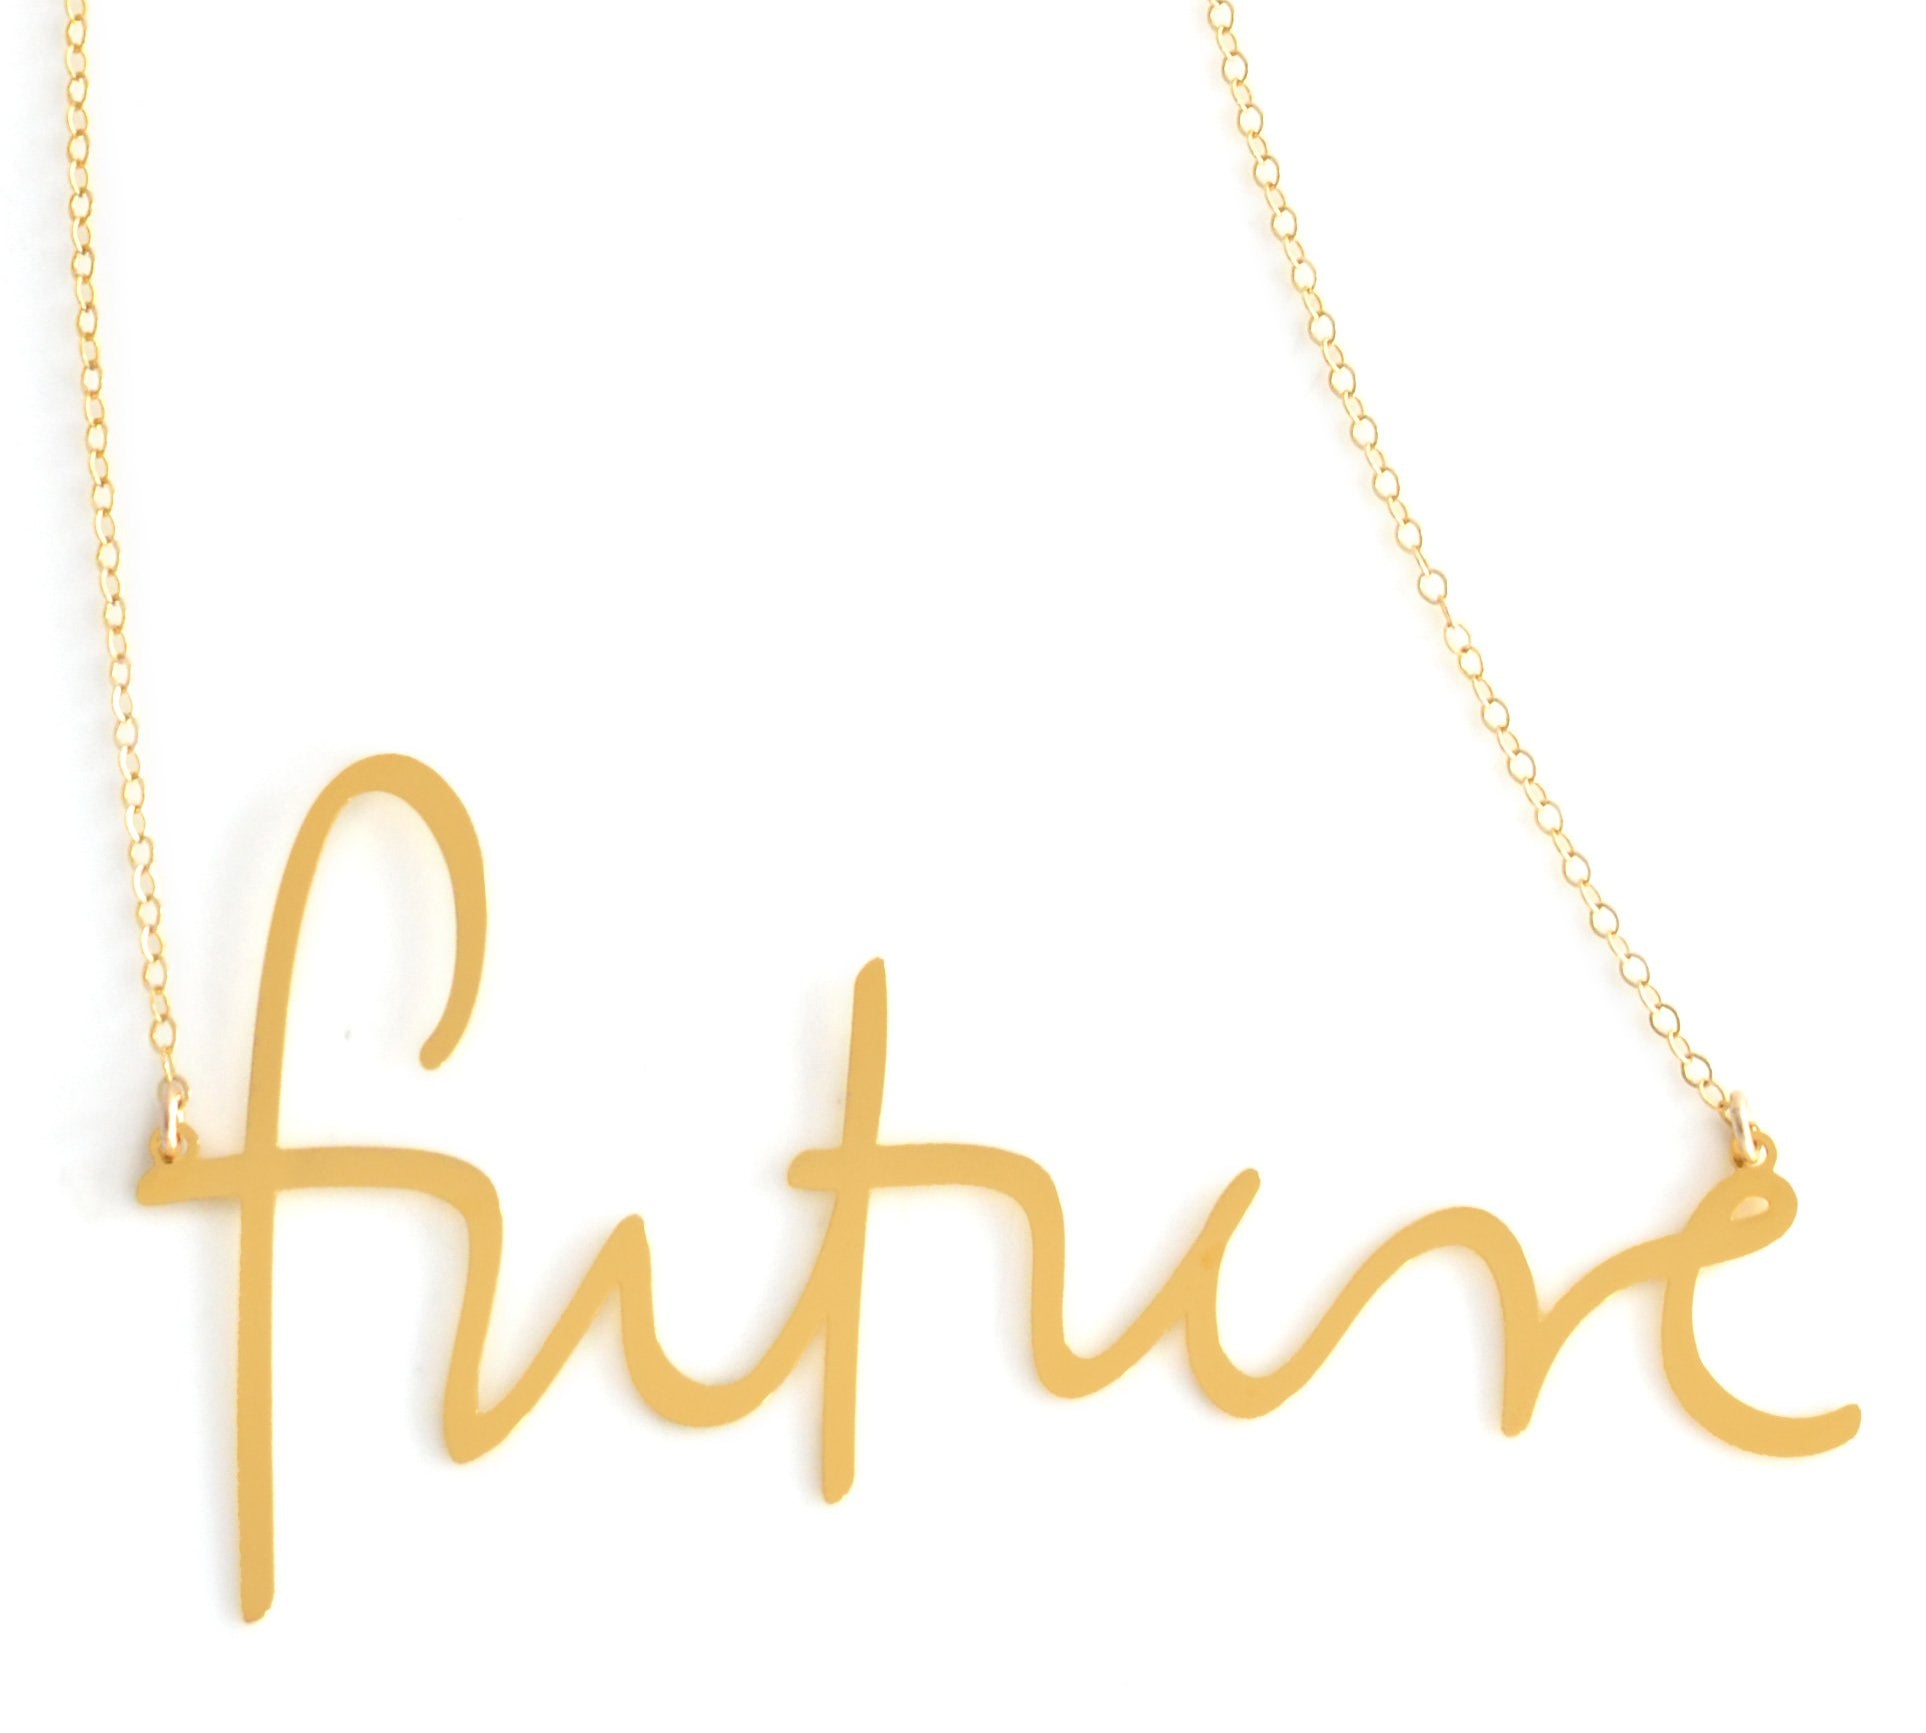 Future Necklace - High Quality, Affordable, Hand Written, Empowering, Self Love, Mantra Word Necklace - Available in Gold and Silver - Small and Large Sizes - Made in USA - Brevity Jewelry